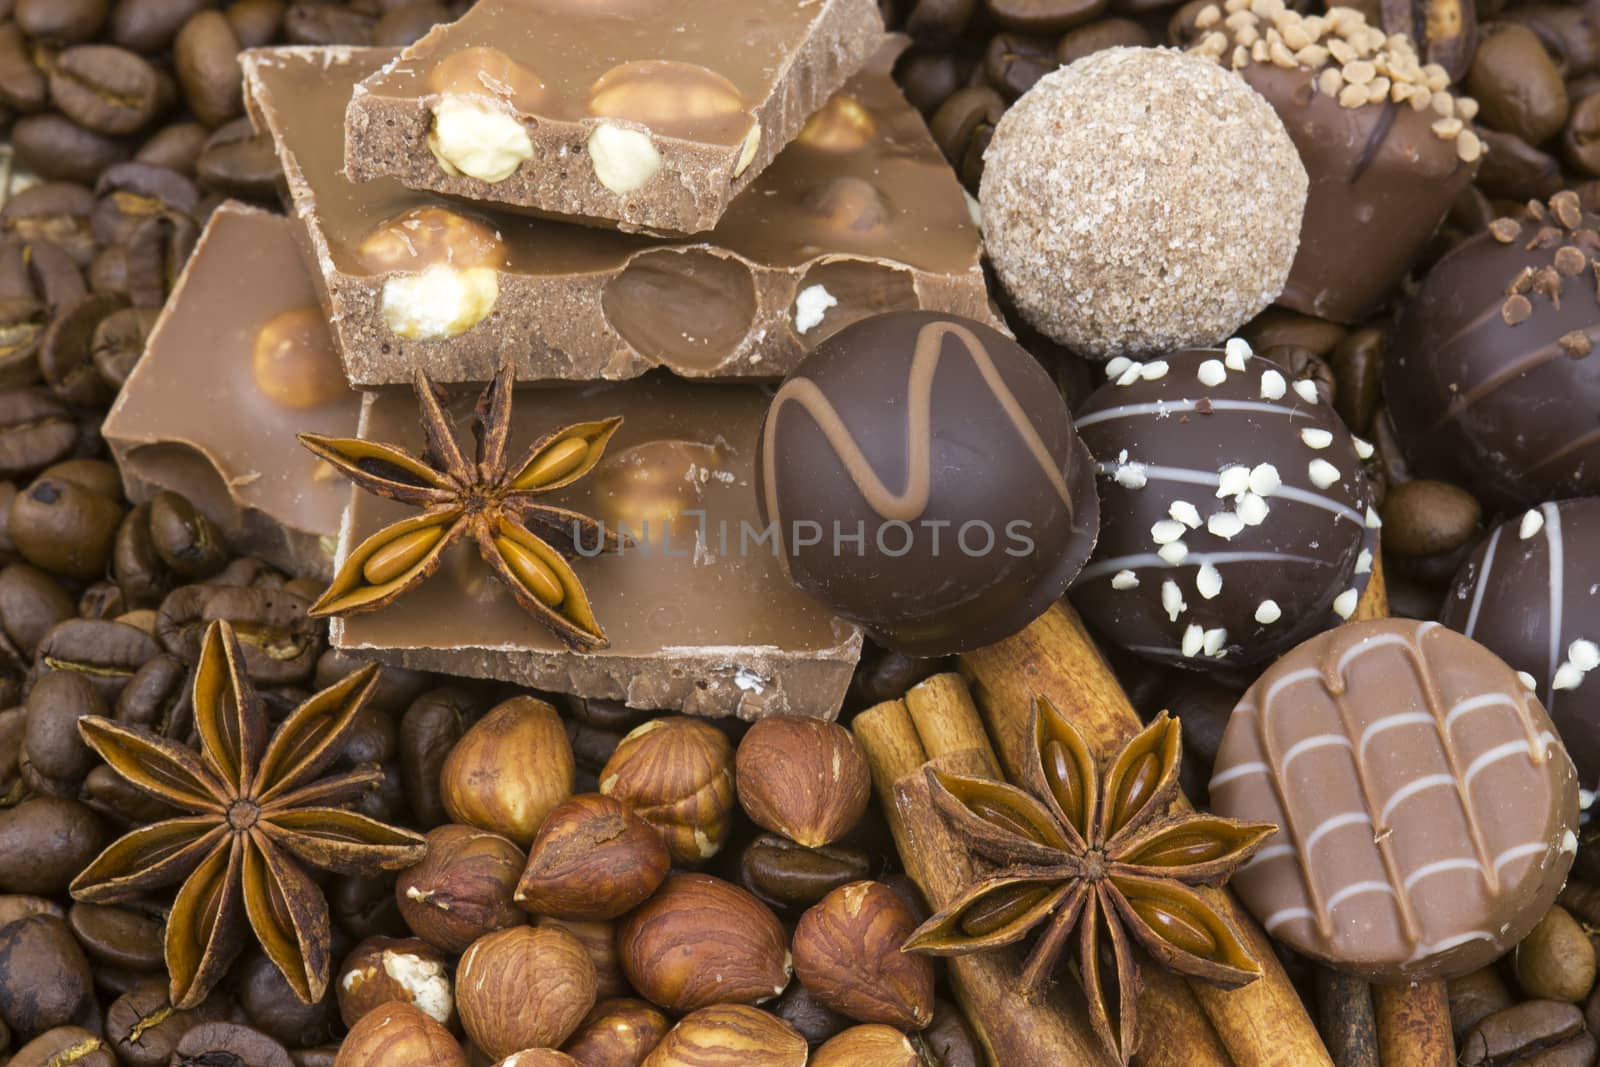 chocolate, coffee, spices and nuts by miradrozdowski